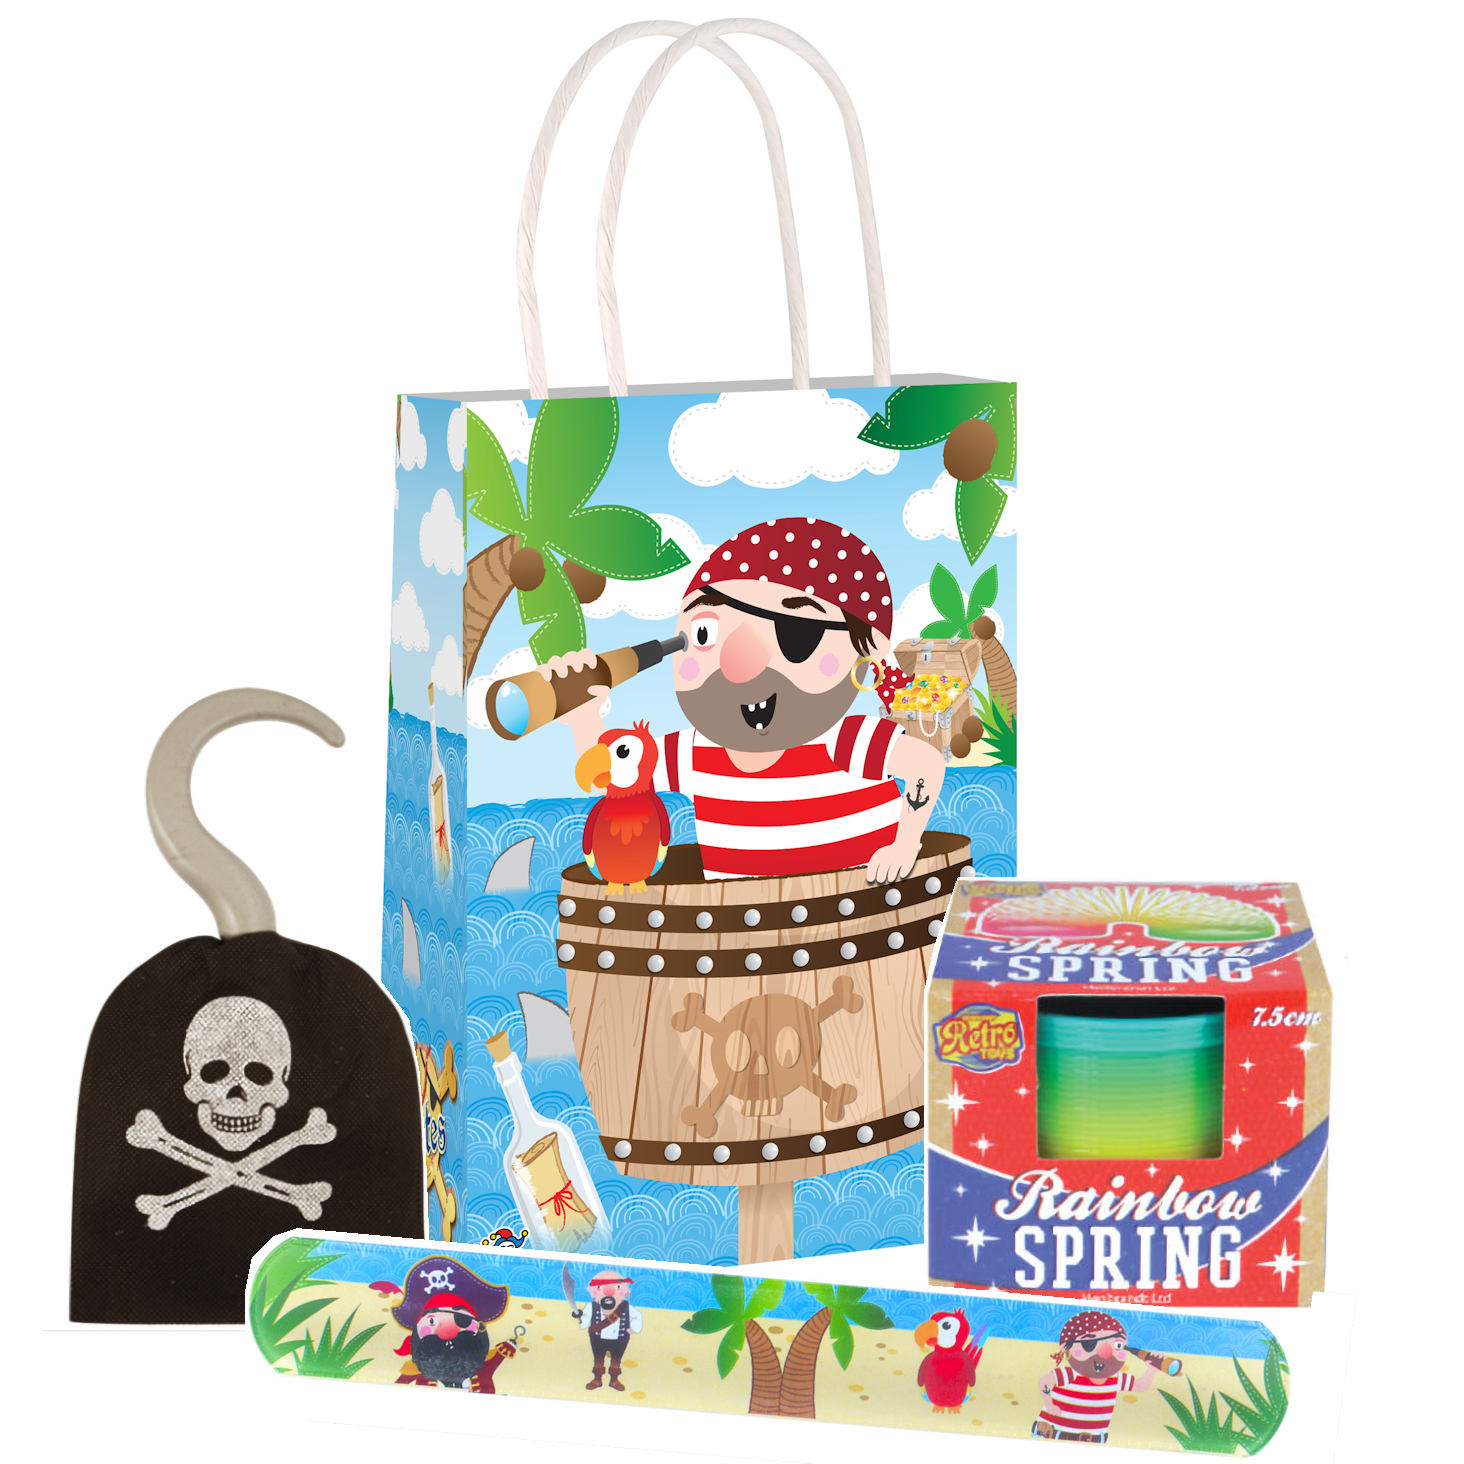 PIRATE THEMED PARTY BAGS